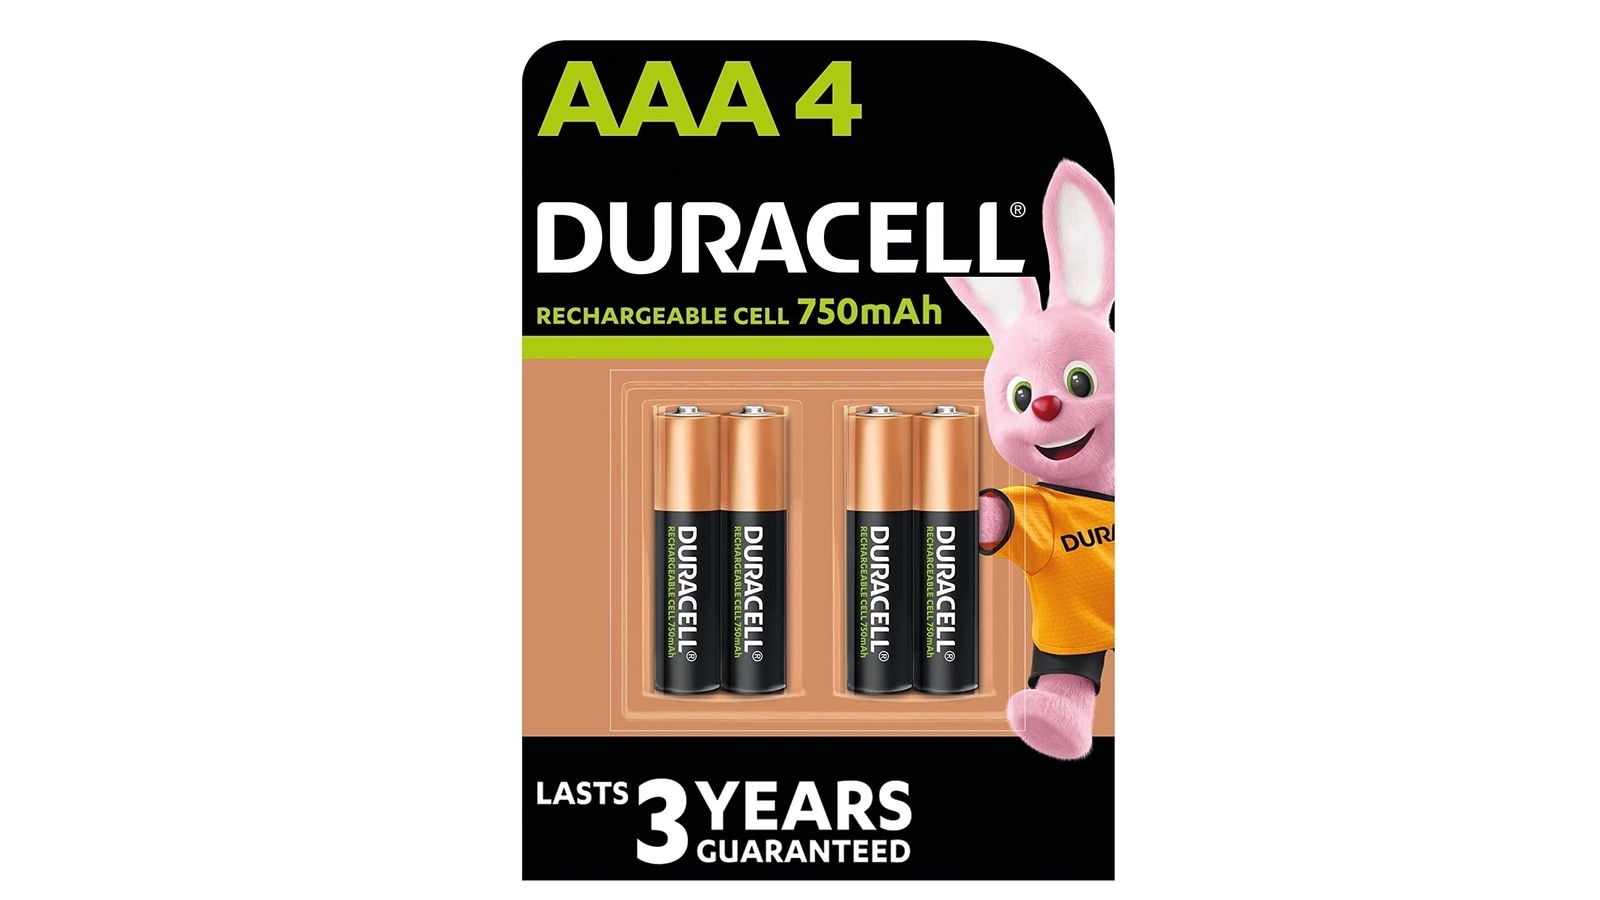 Duracell AA Batteries - Traditional or rechargeable versions